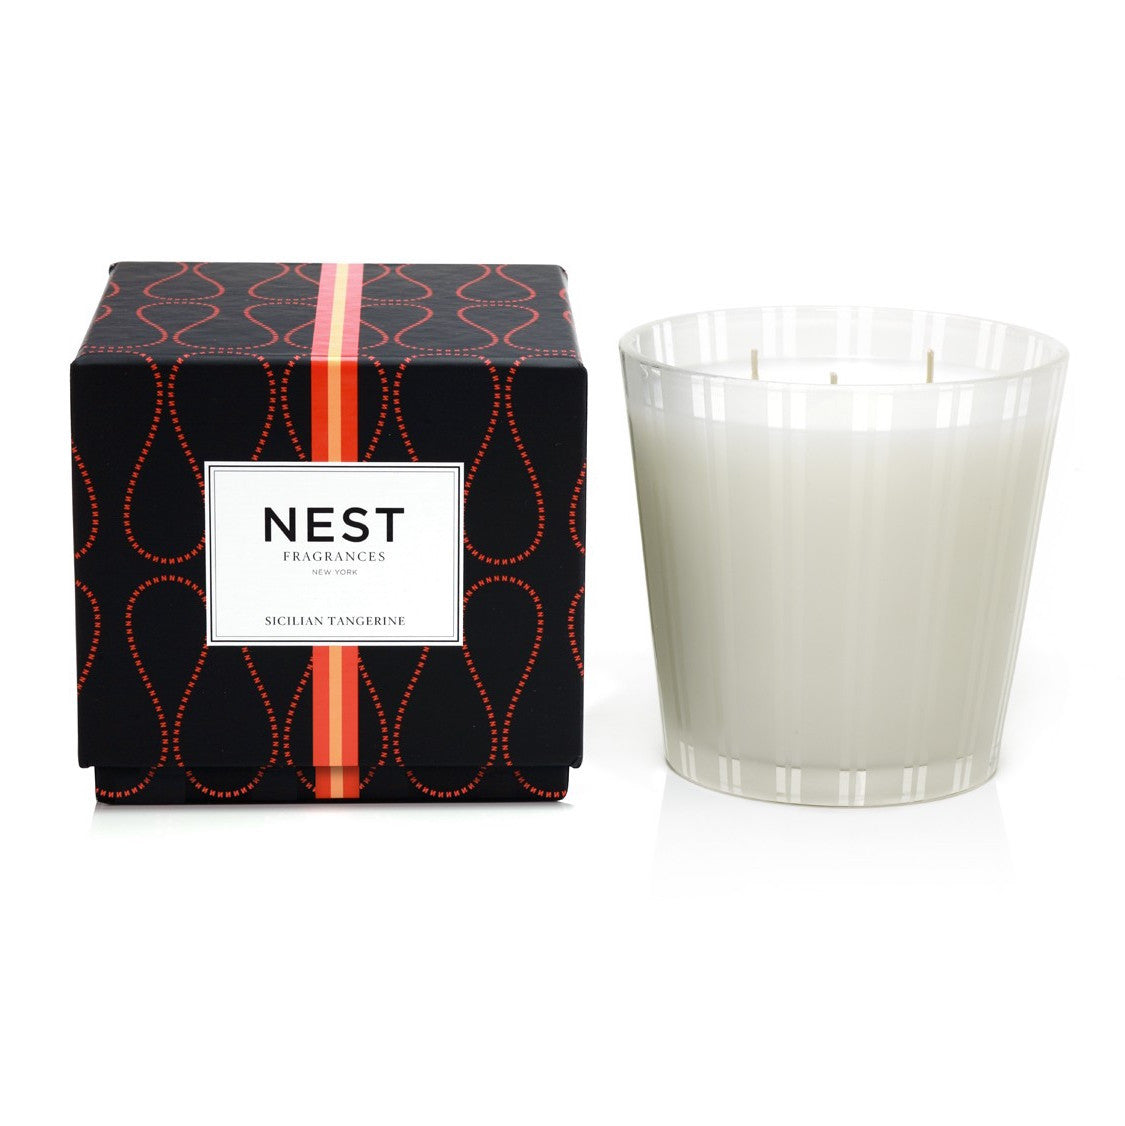 Nest Fragrances Silician Tangerine 3-Wick Candle